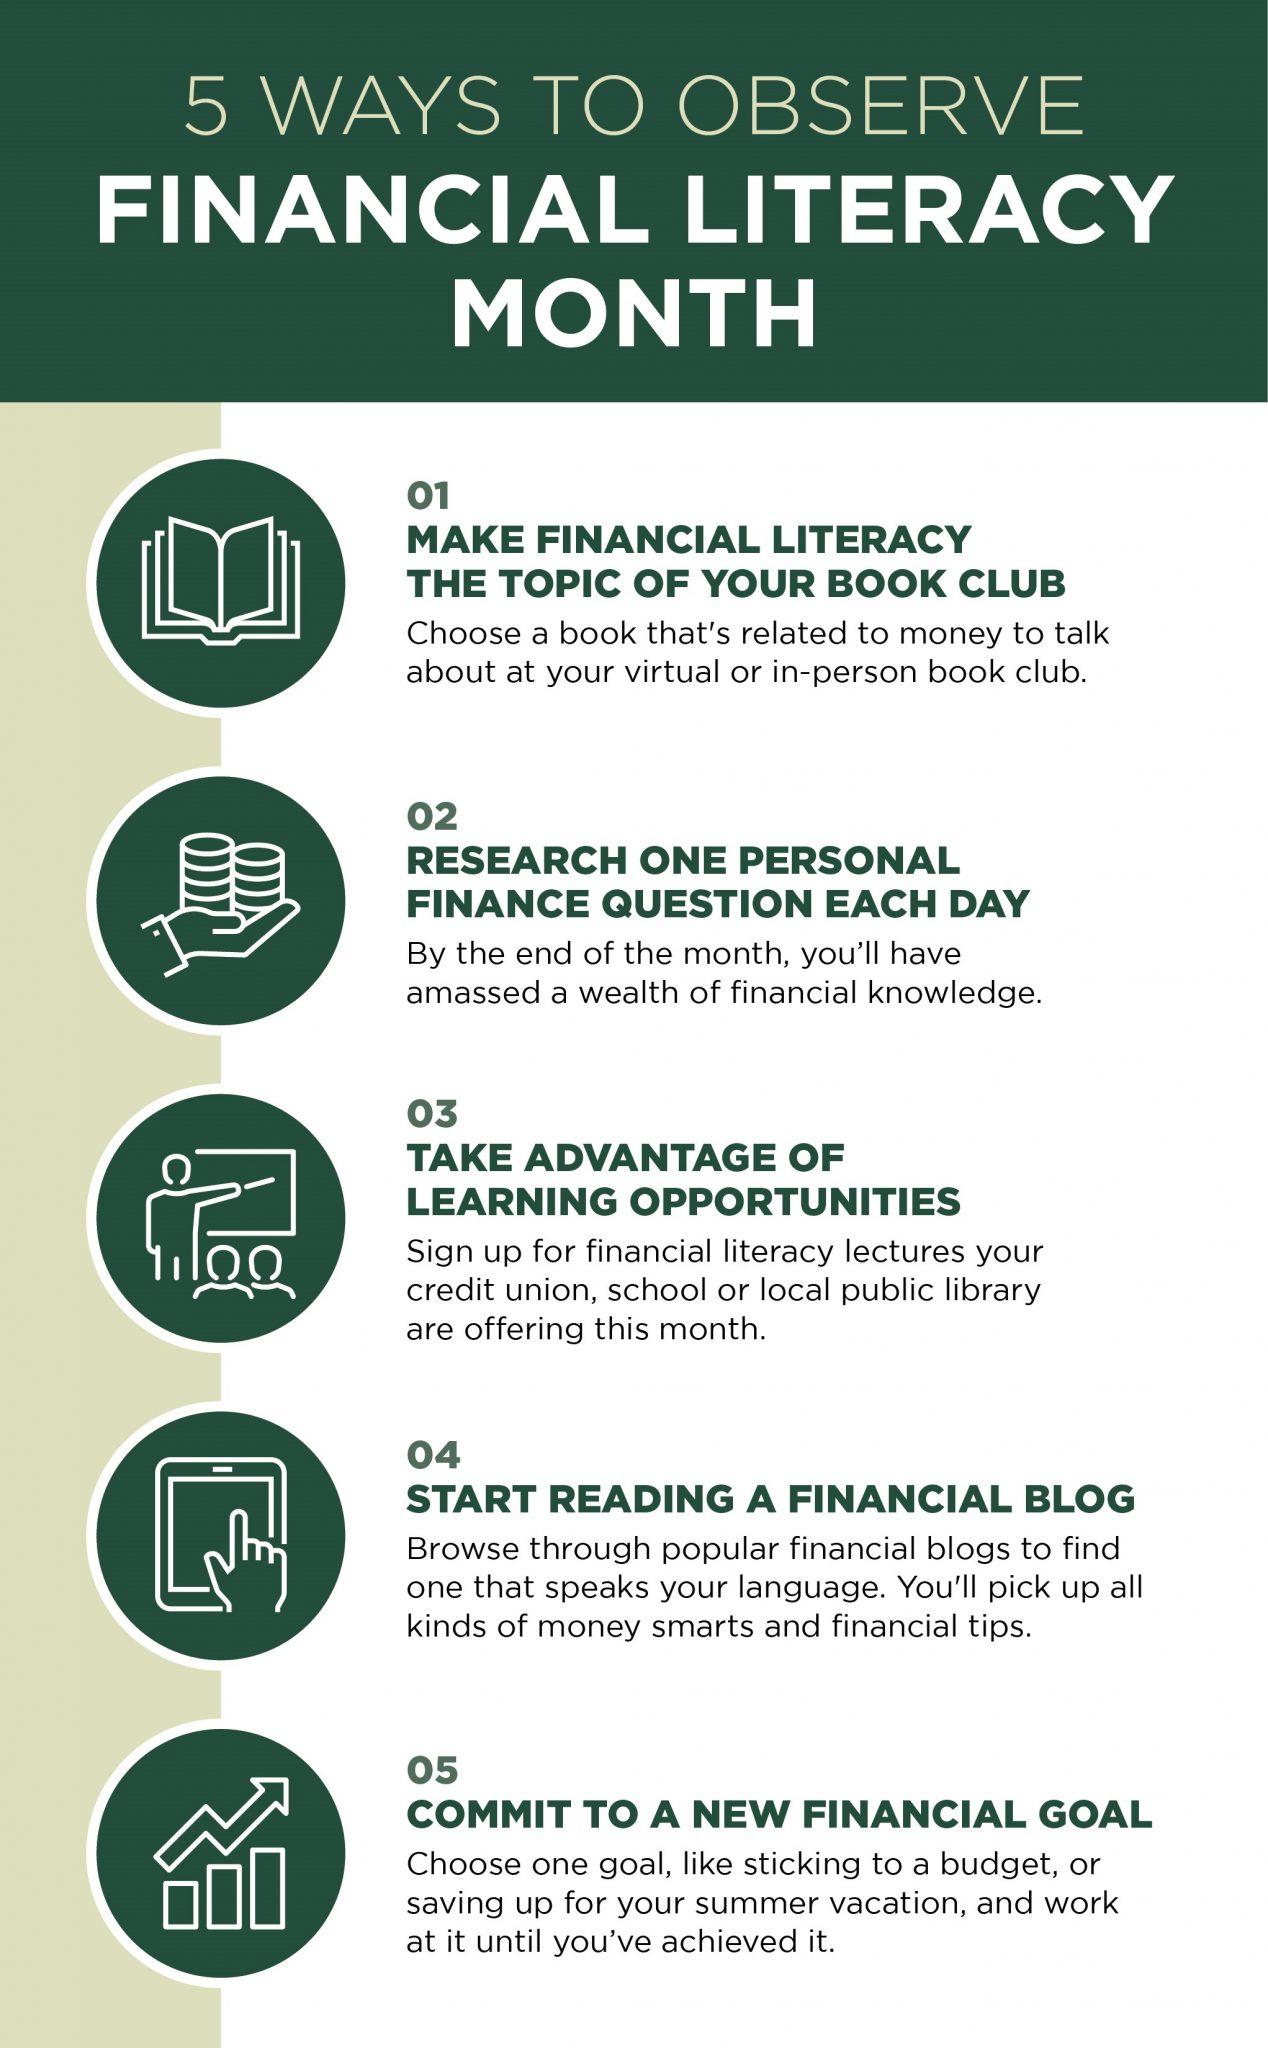 How to Observe FinancIal Literacy Month Infographic